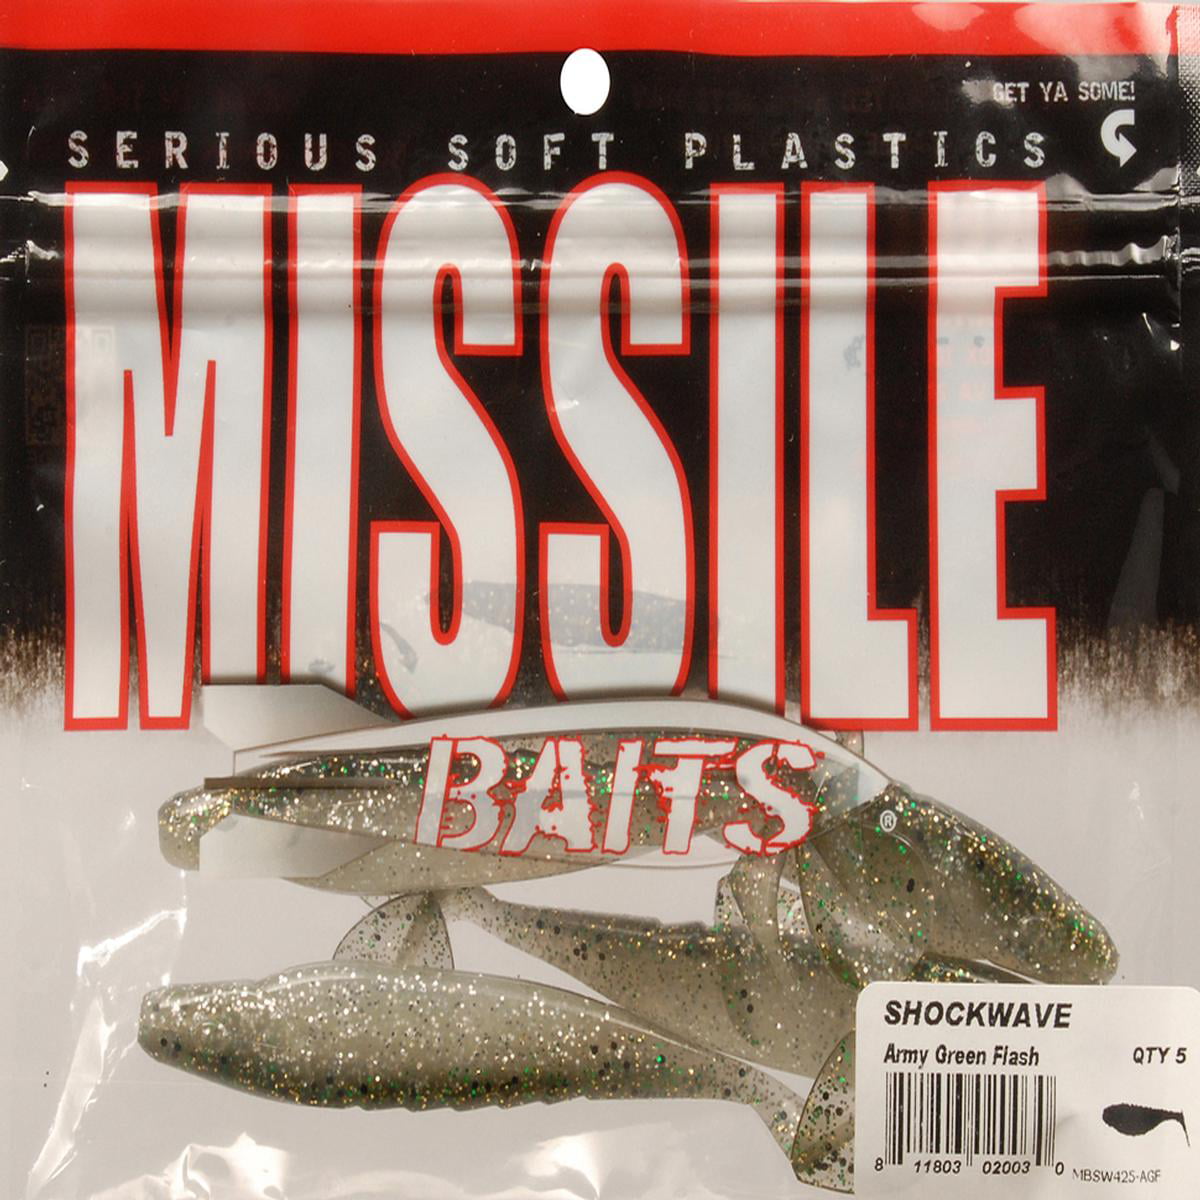 Missile Baits Shockwave 4.25 Agf - 5 Pk - MBSW425-AGF